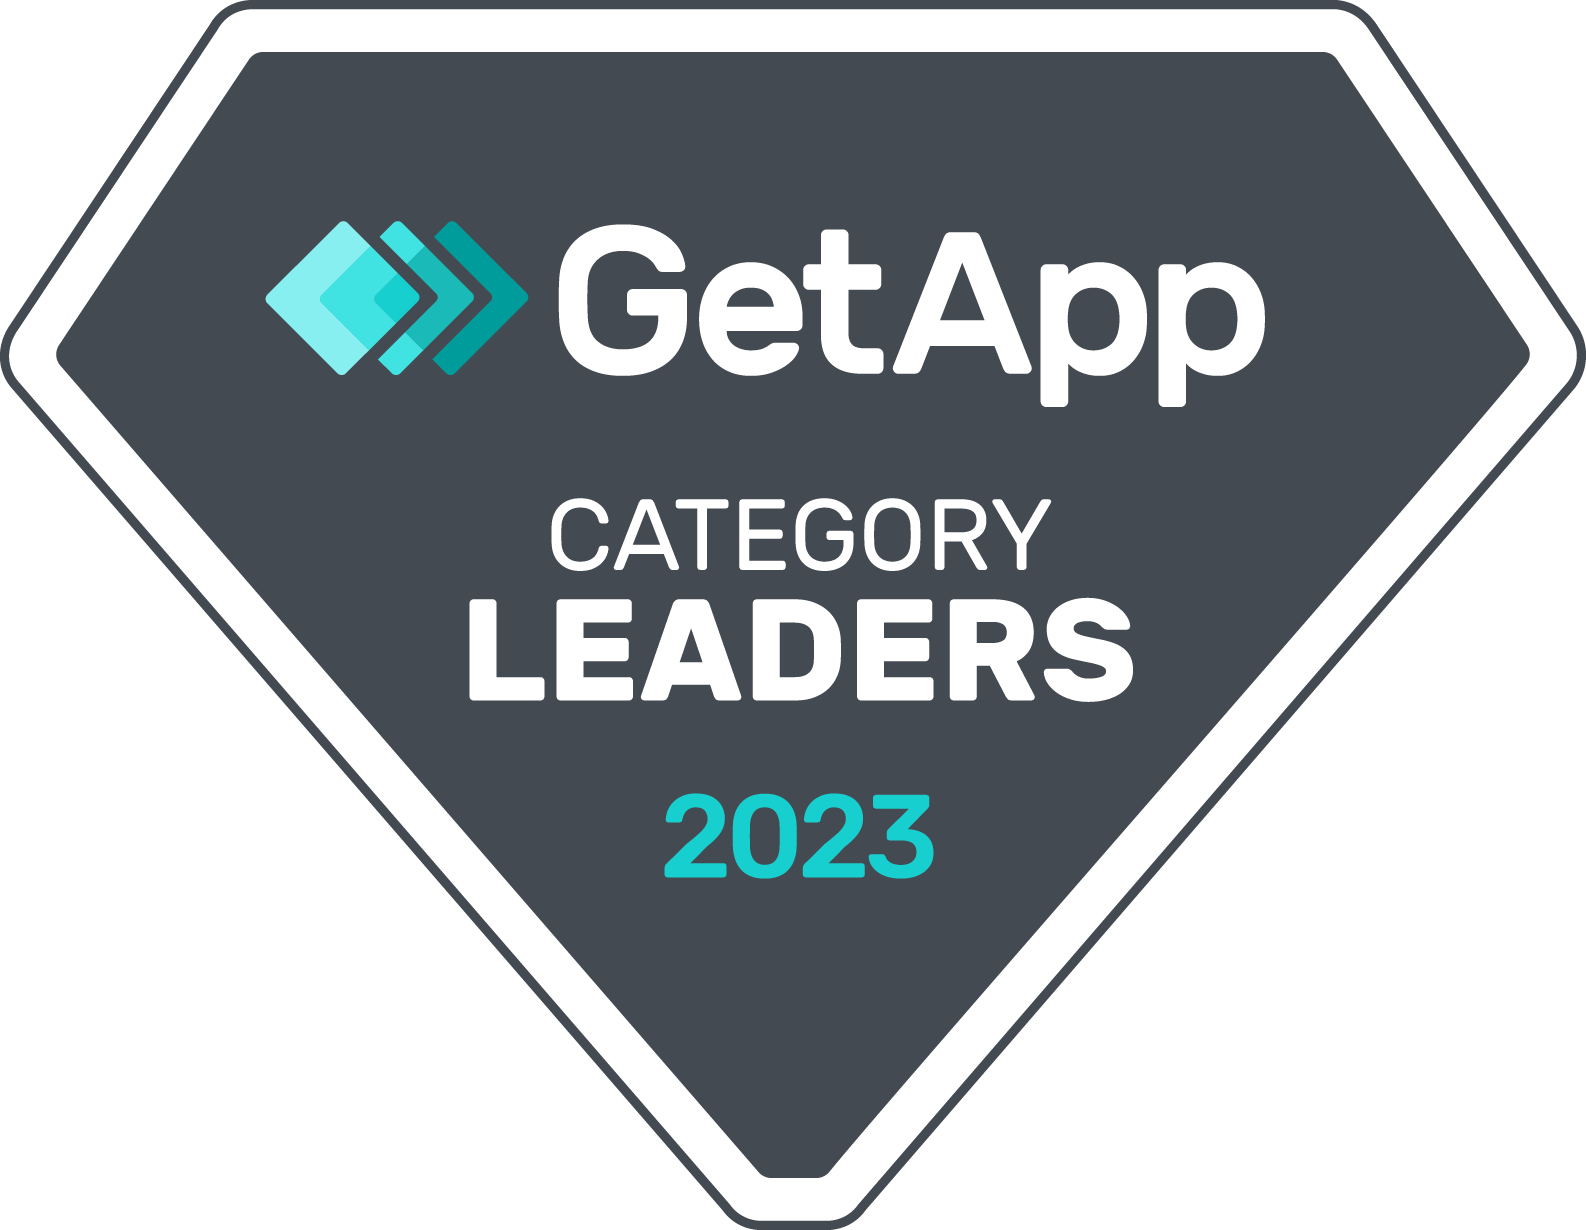 GetApp Category Leaders for Billing & Invoicing 2023